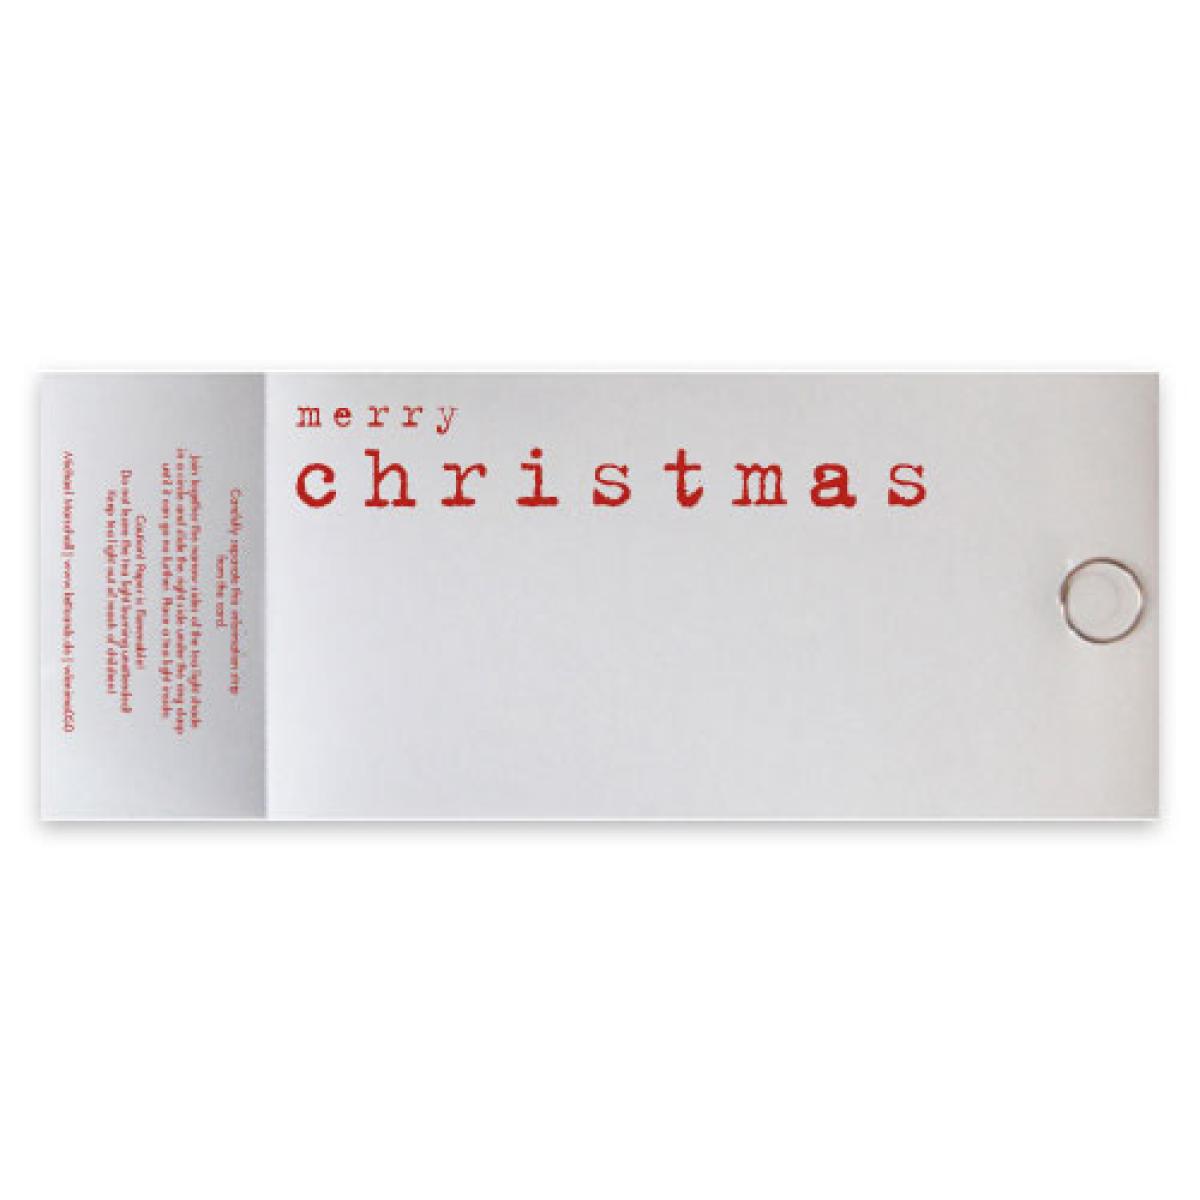 10 Christmas Cards with envelopes: merry christmas